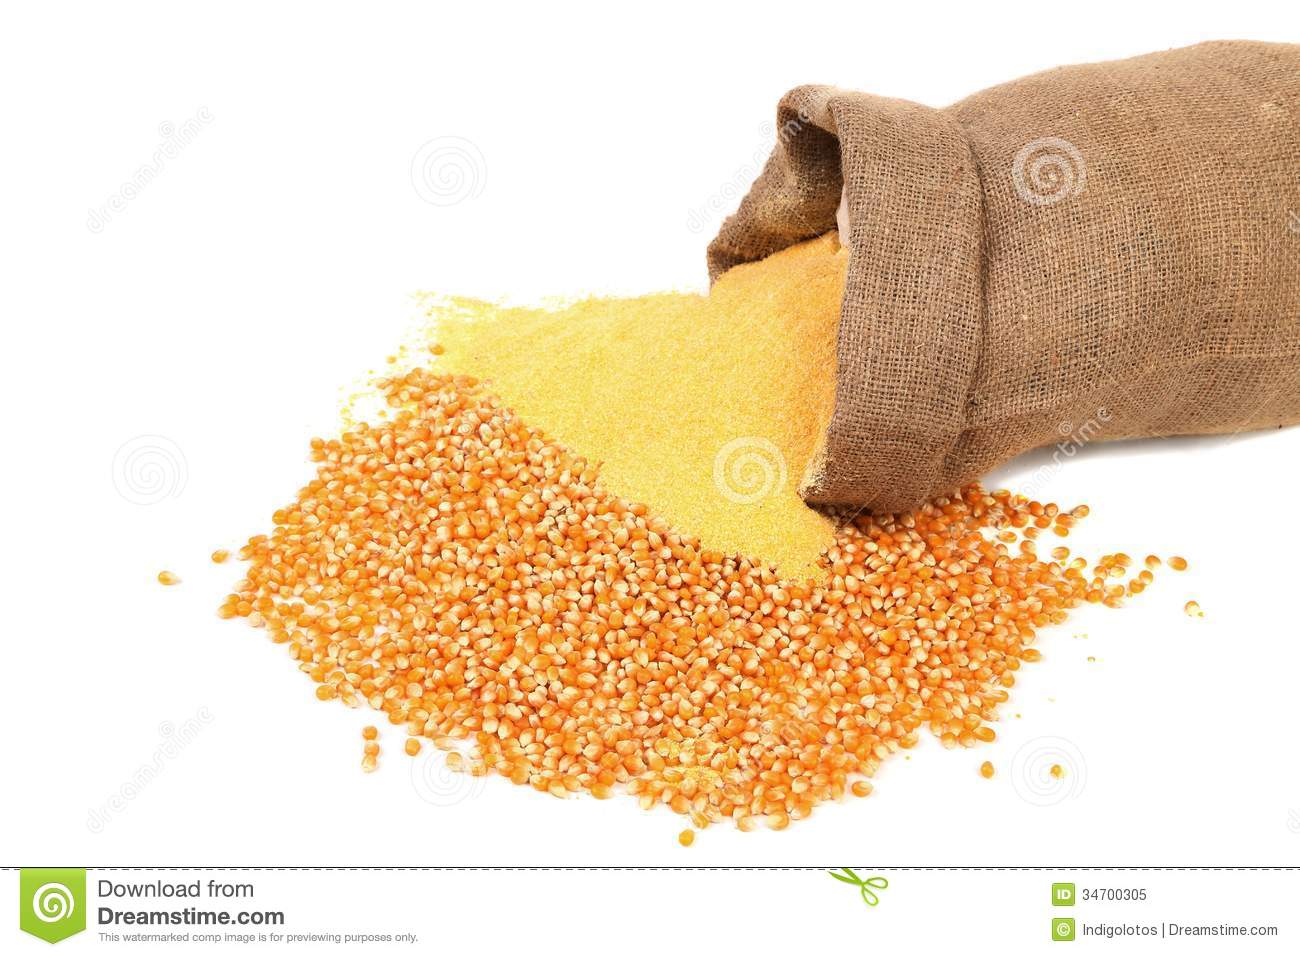 Corn Meal And Grain In Bag Royalty Free Stock Photo   Image  34700305